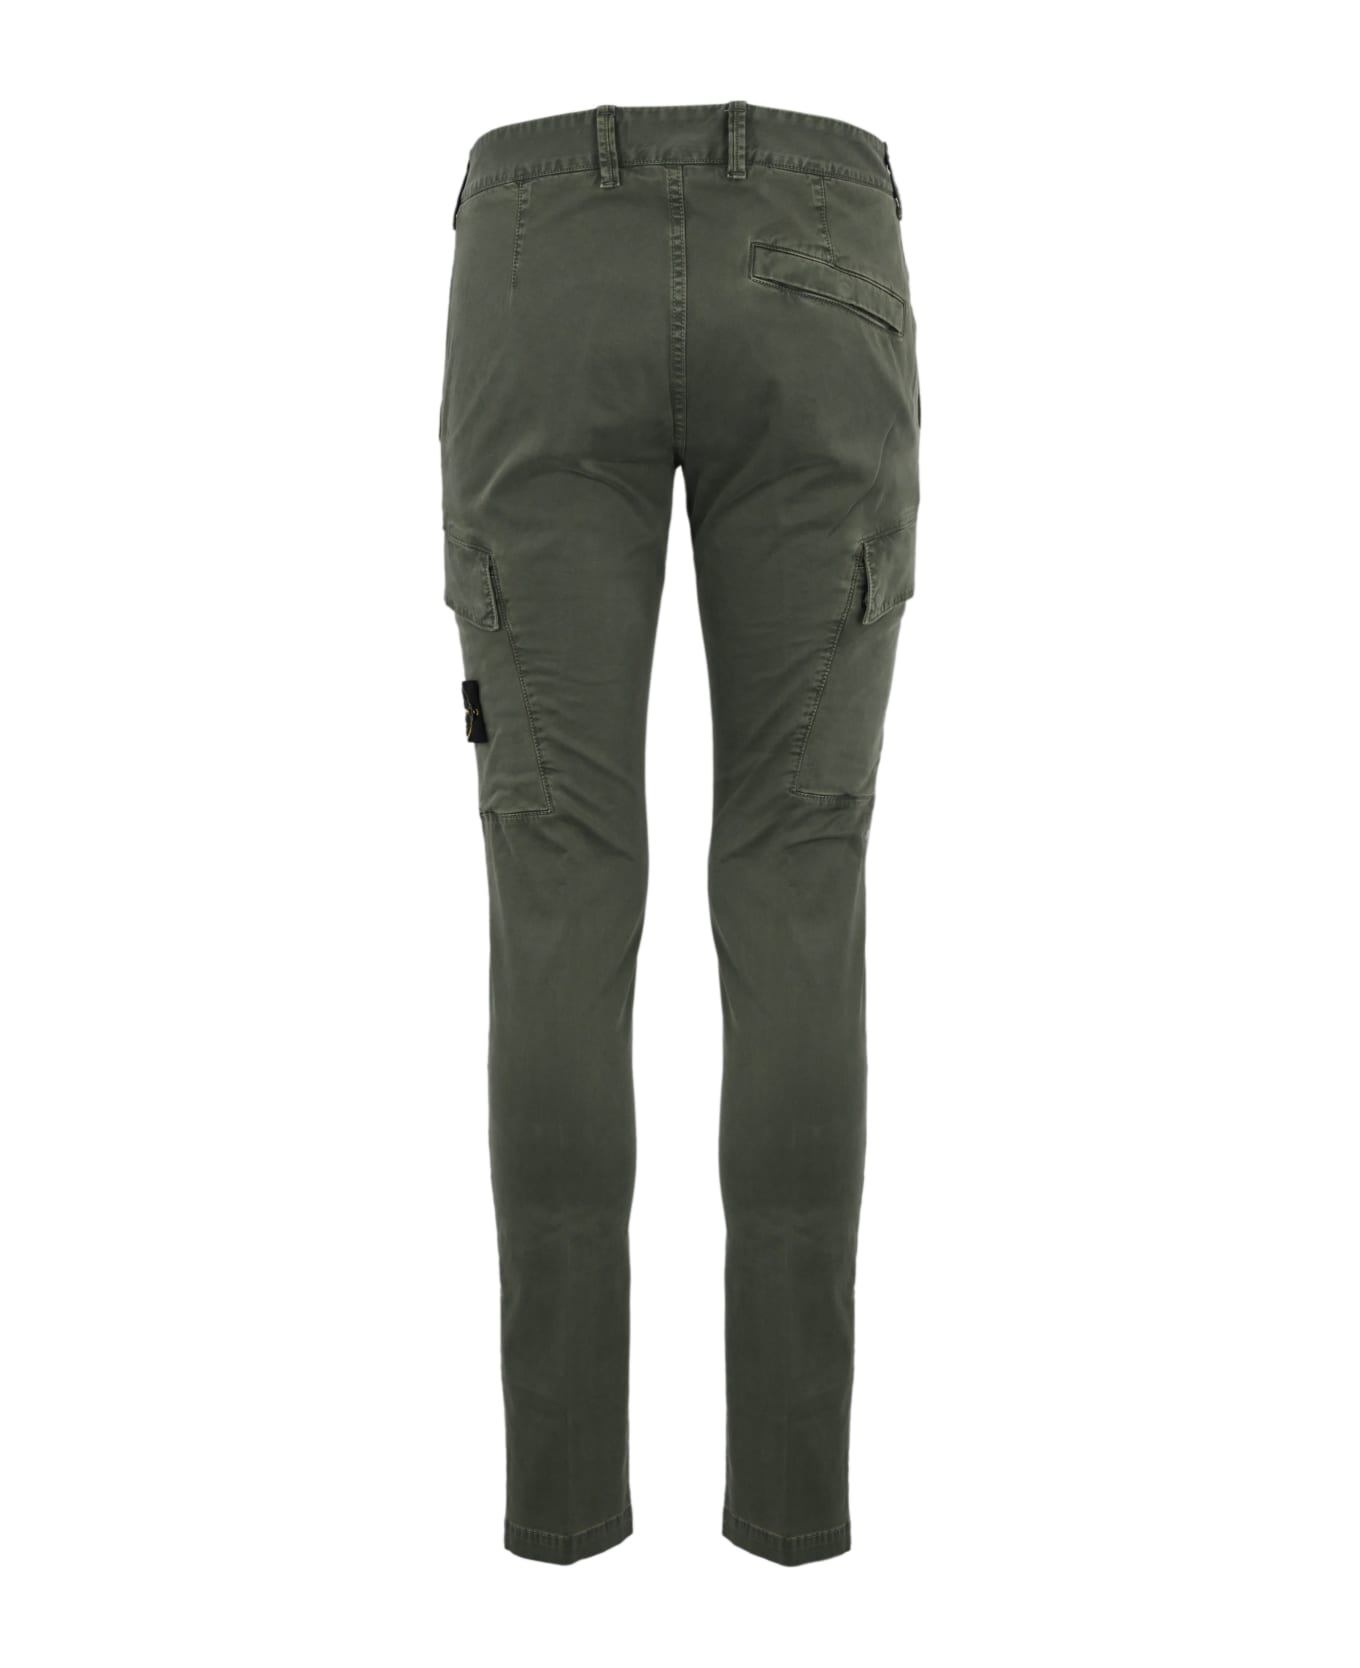 Stone Island Cargo Trousers 30604 Old Treatment - Musk ボトムス